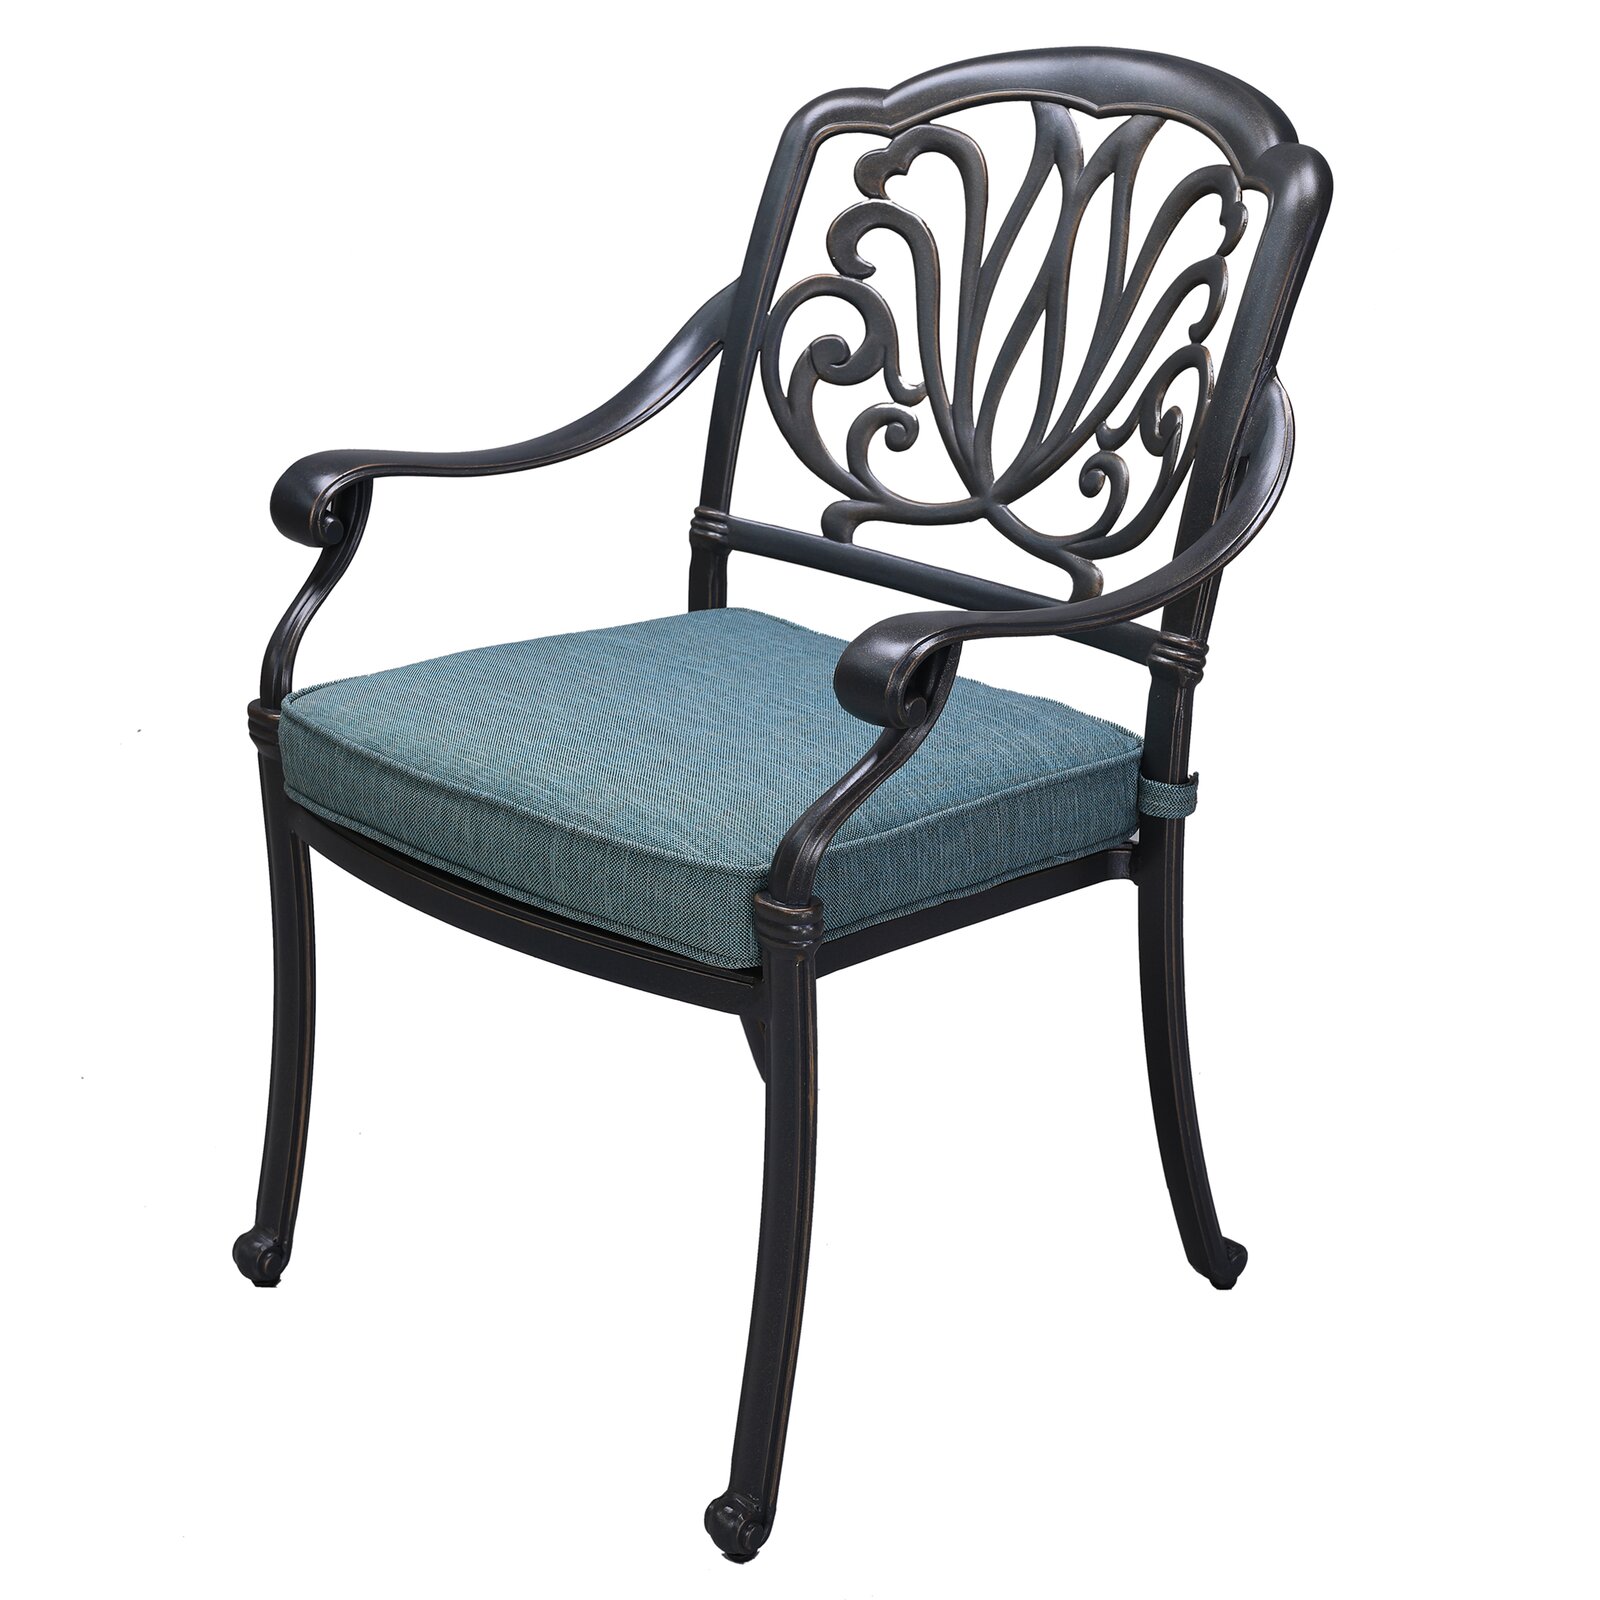 Kilmer Patio Dining Chair with Cushion, Seat: 16" H, Stacking: Yes - image 4 of 4